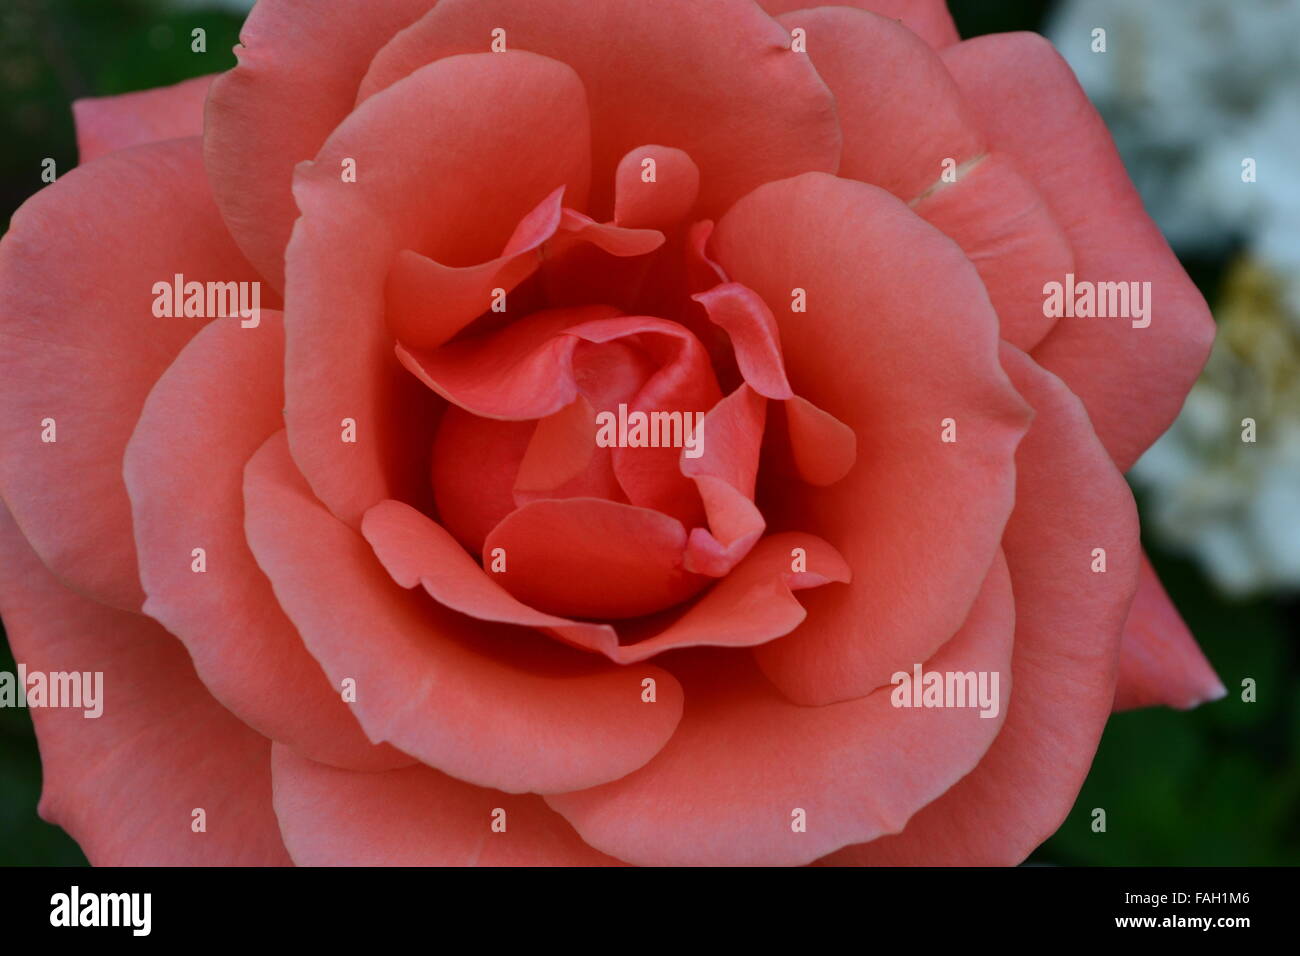 Large orange pink rose flower with well defined petals Stock Photo